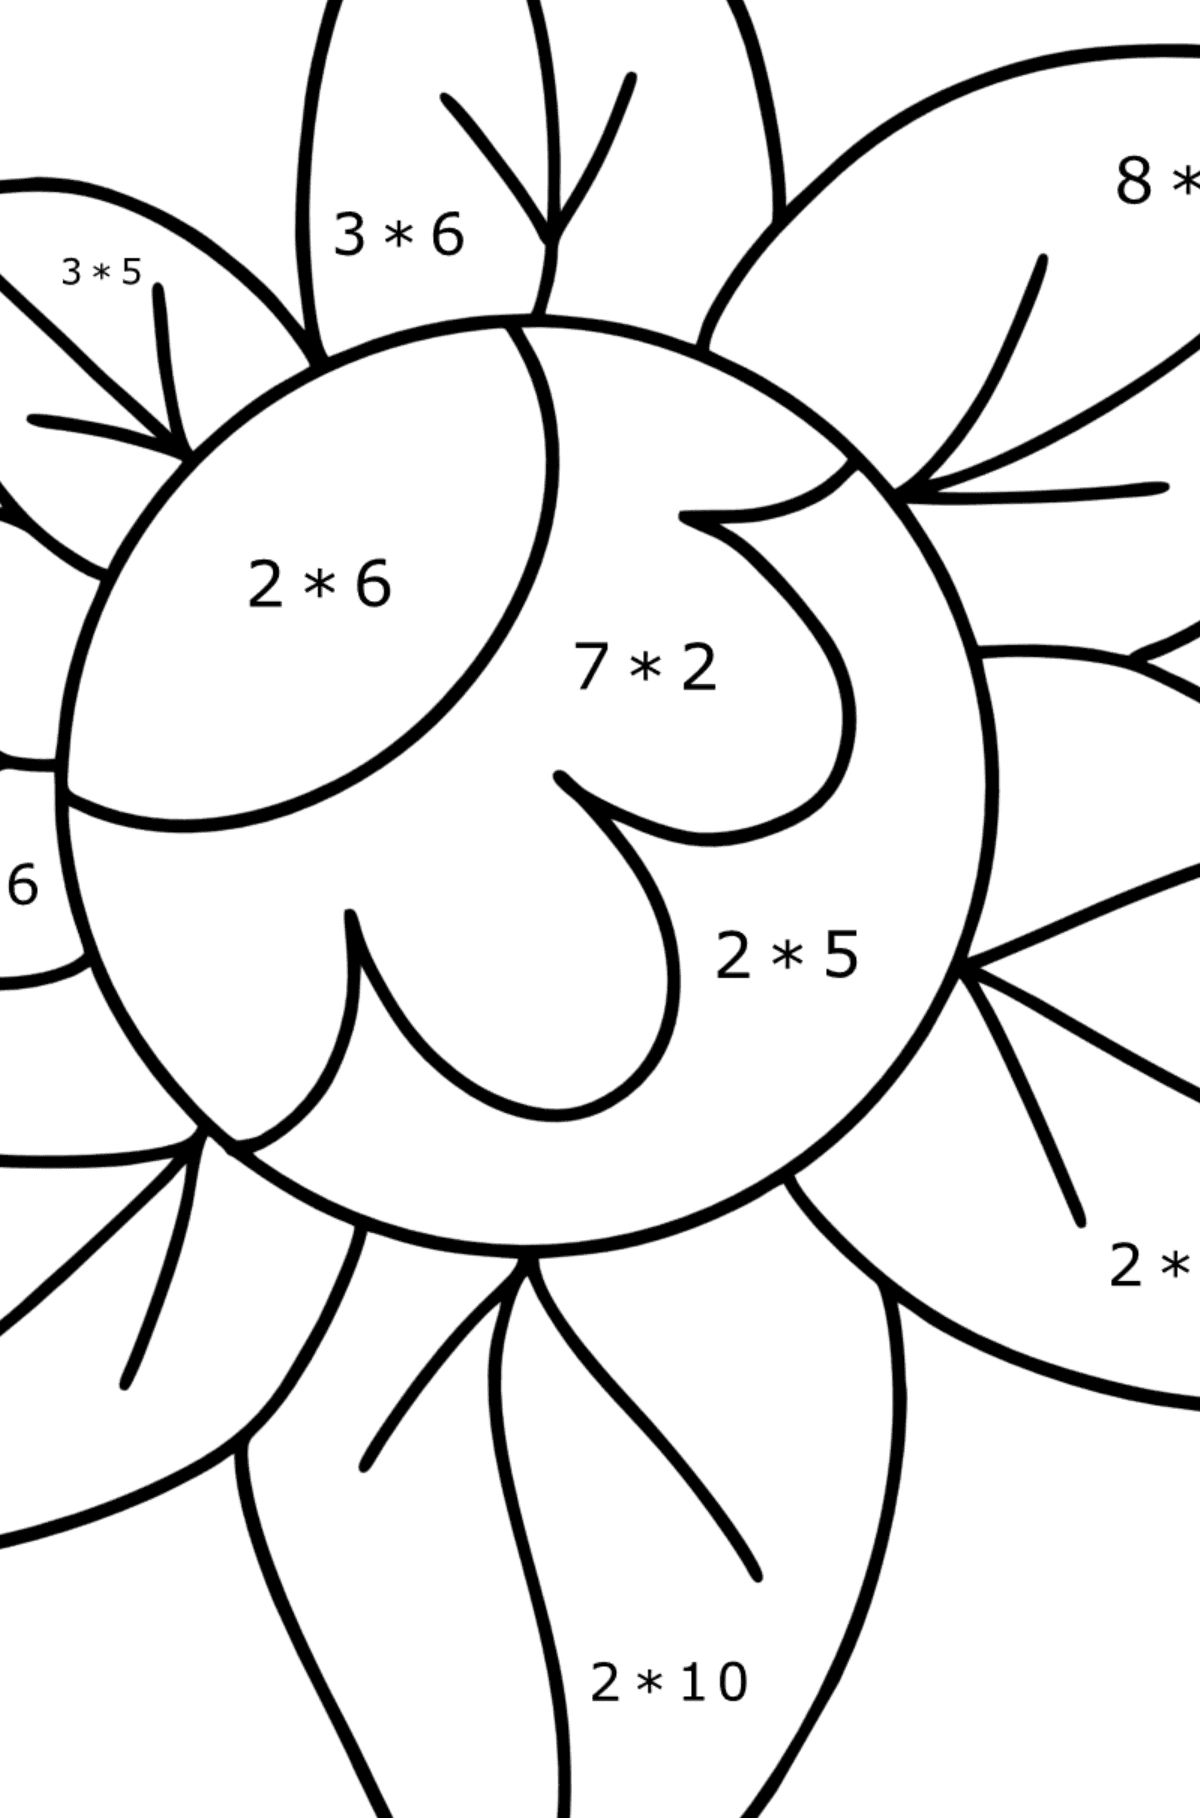 Zentangle Art flower coloring page - Math Coloring - Multiplication for Kids